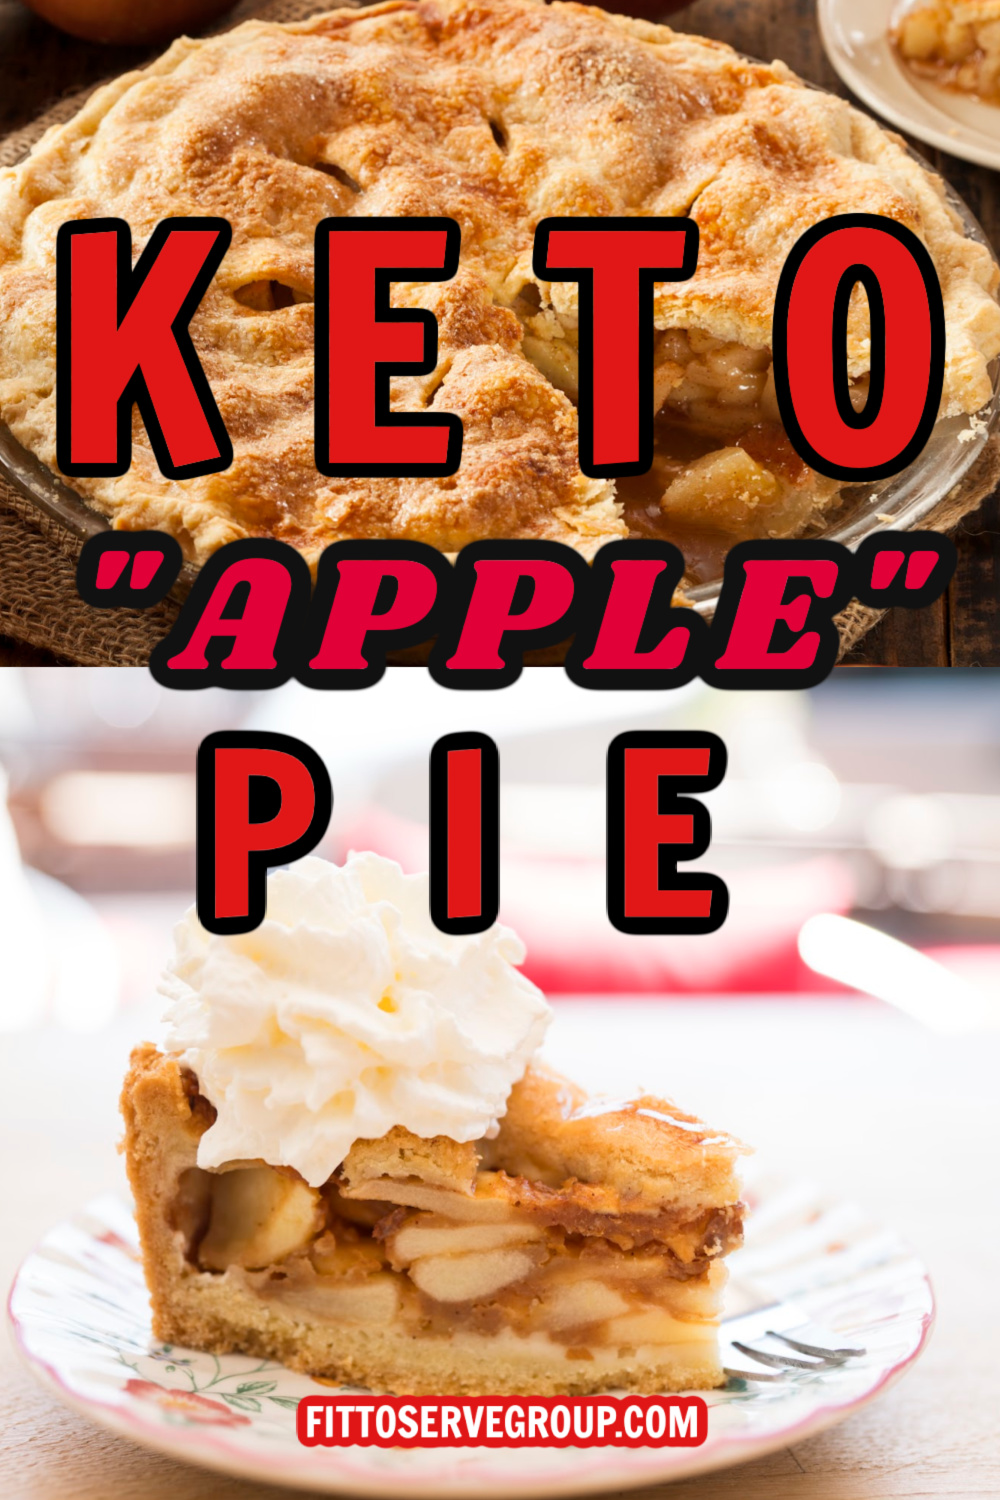 Keto Apple Pie Made With Squash